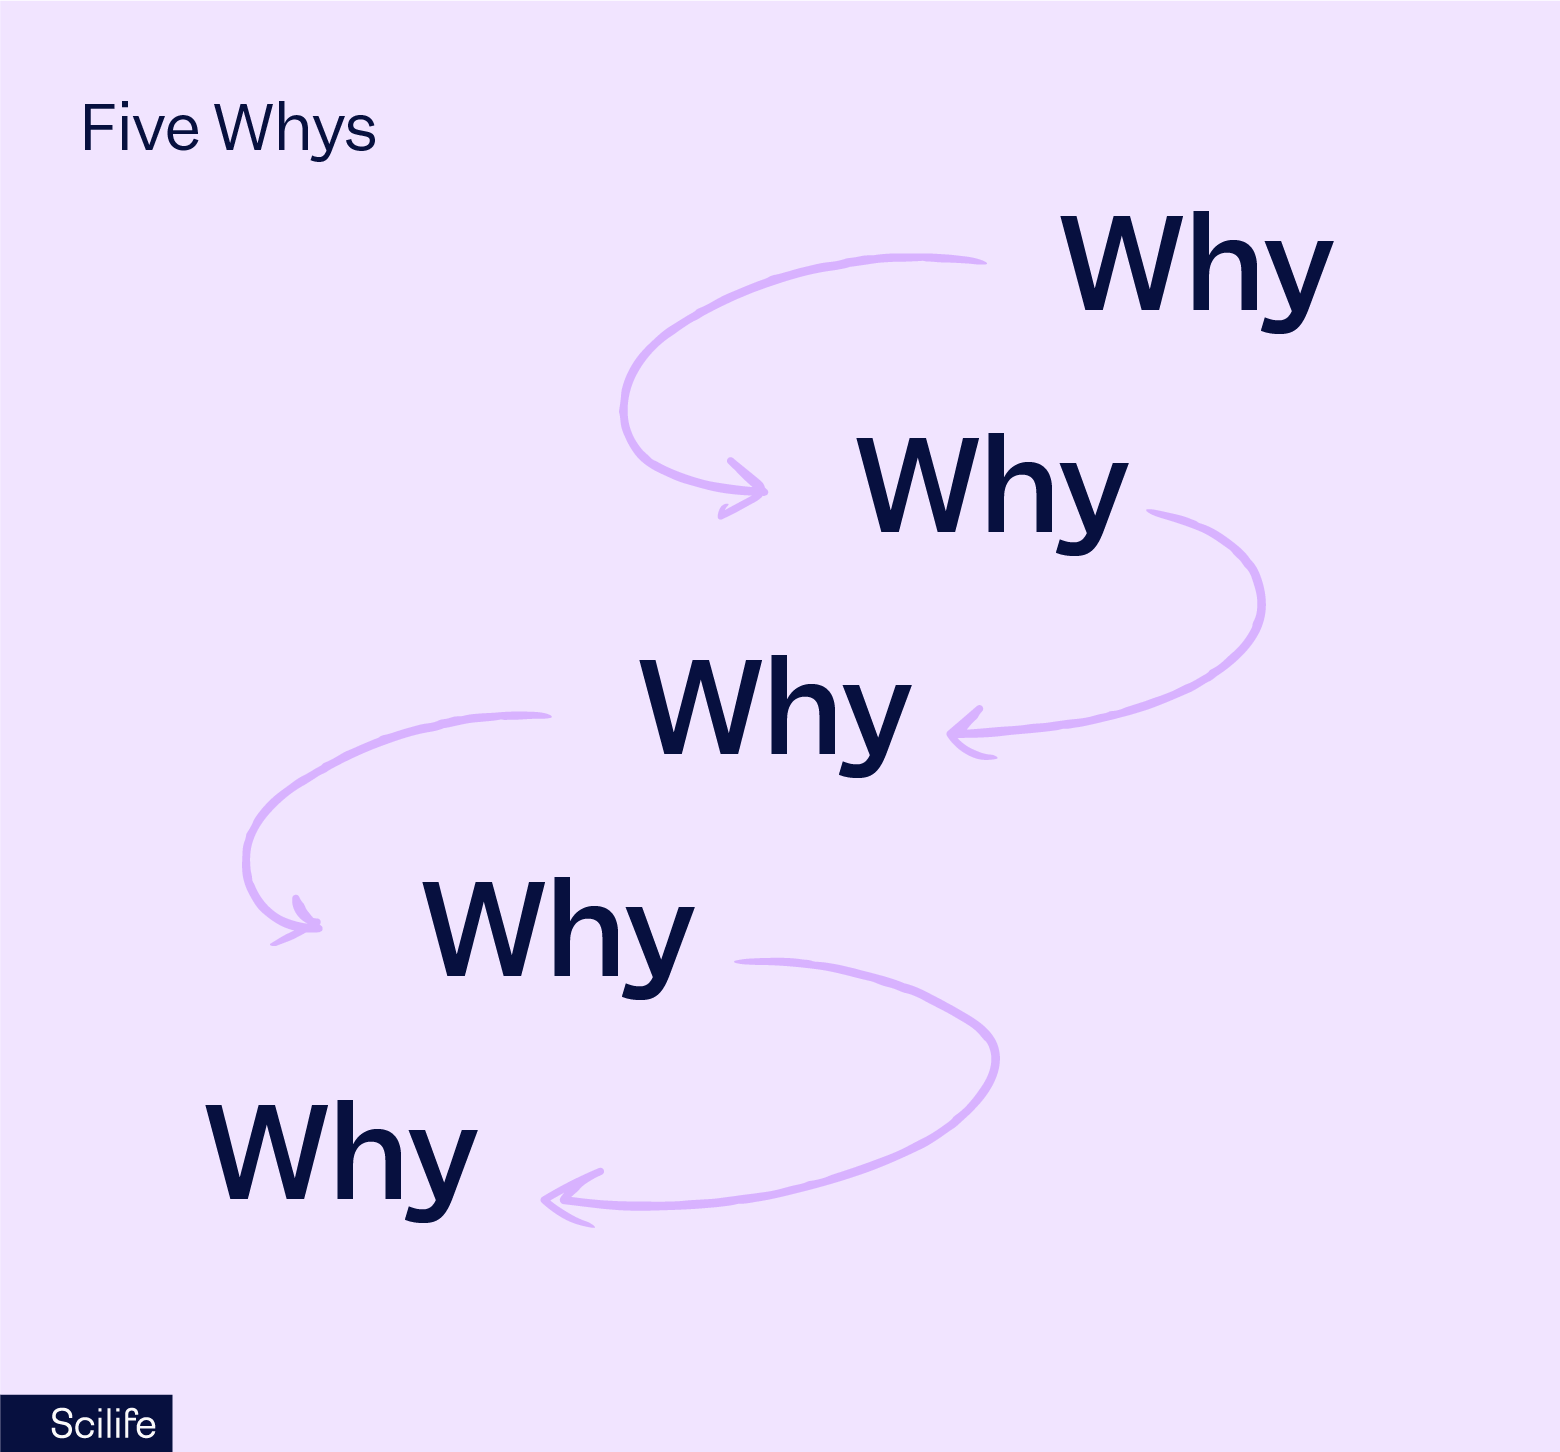 A diagram representing the 5 Whys quality tools with arrows pointing to the next Why | Scilife